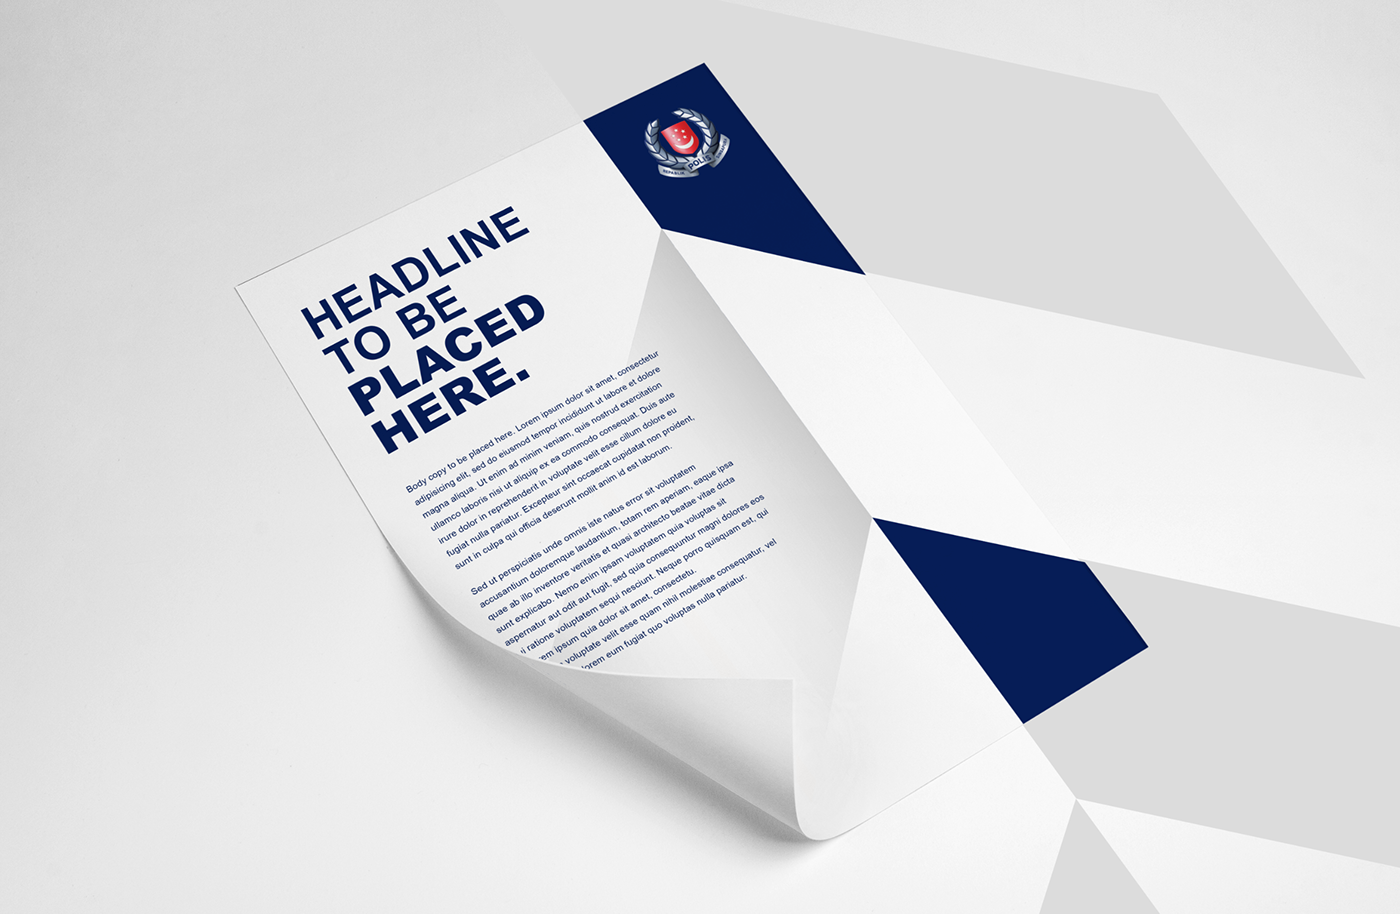 police SPF Government security organisation safety Rebrand corporate public sector singapore